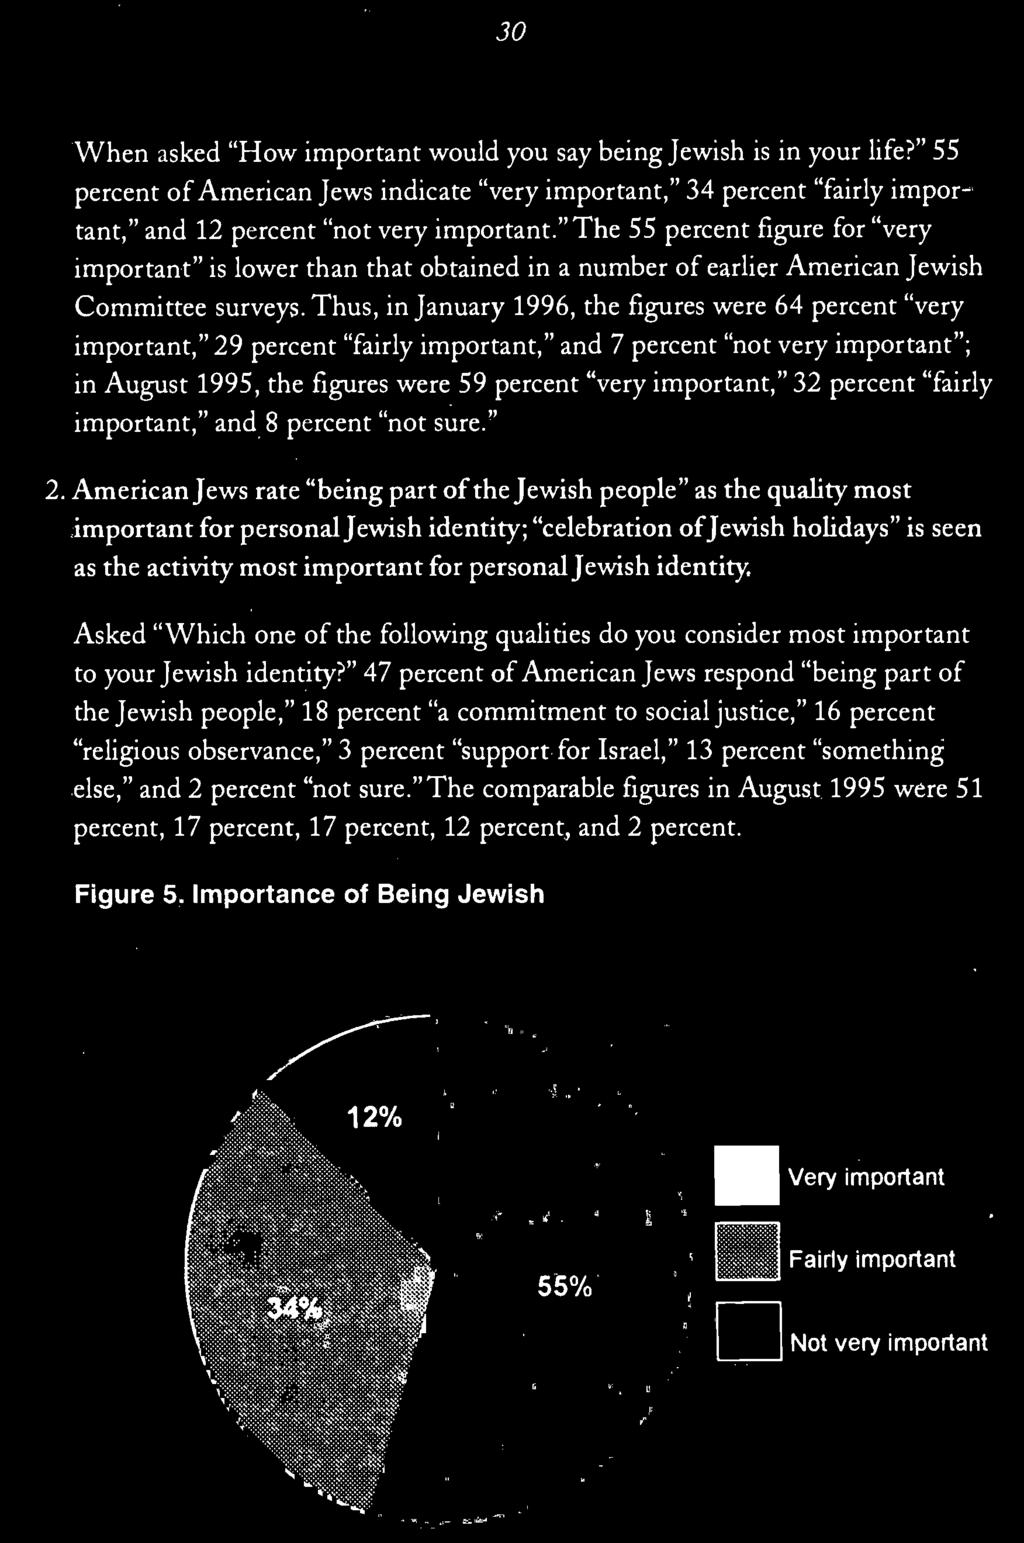 American Jews rate "being part of the Jewish people" as the quality most important for personal Jewish identity; "celebration ofjewish holidays" is seen as the activity most important for personal